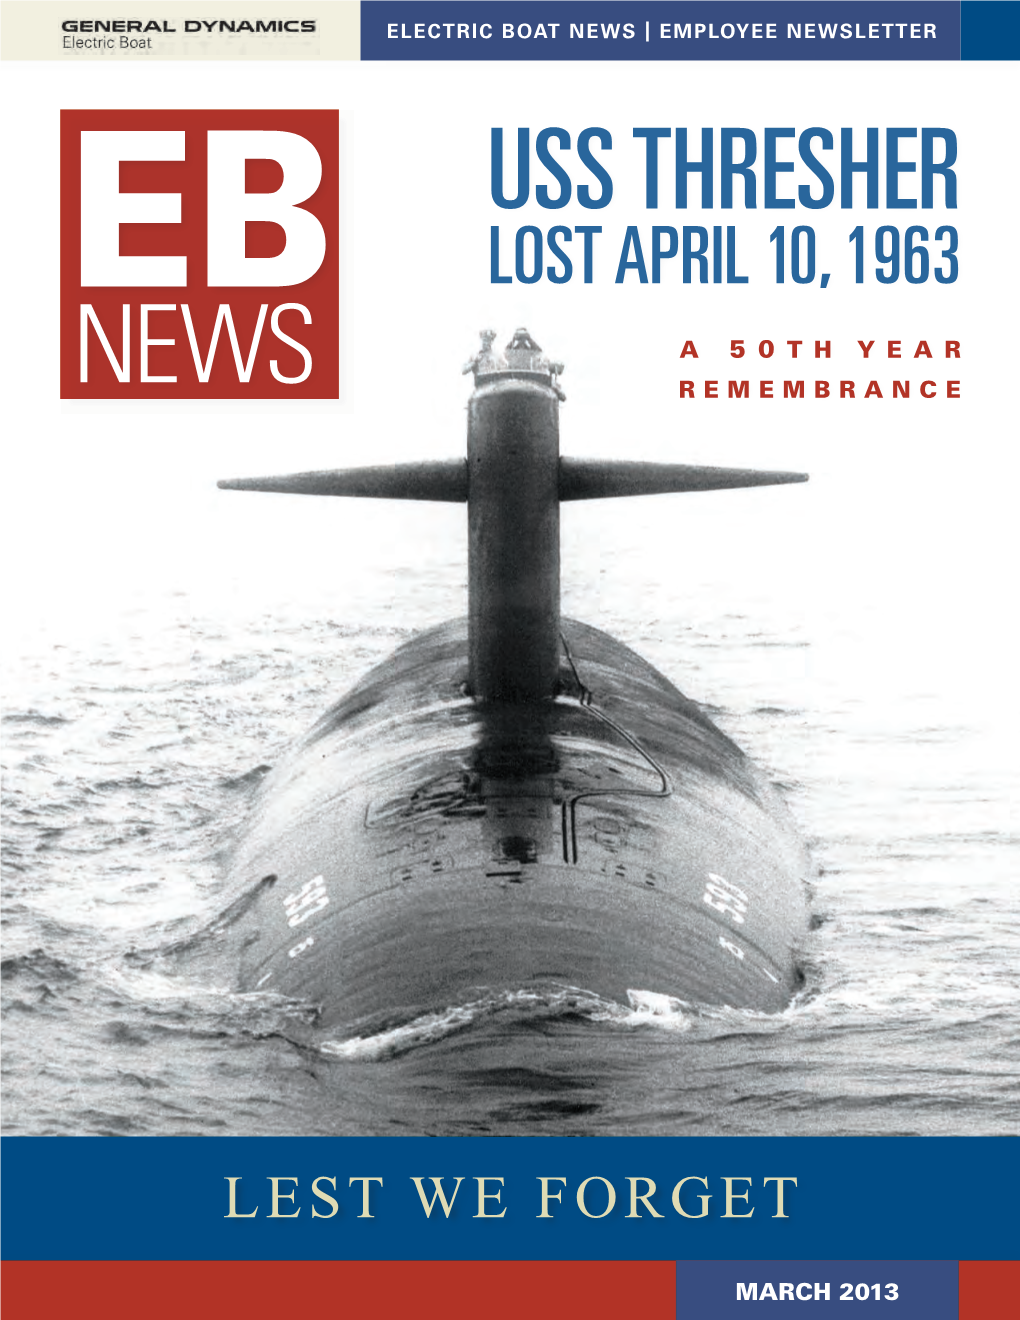 Uss Thresher Eb Lost April 10, 1963 a 50Th Year News Remembrance